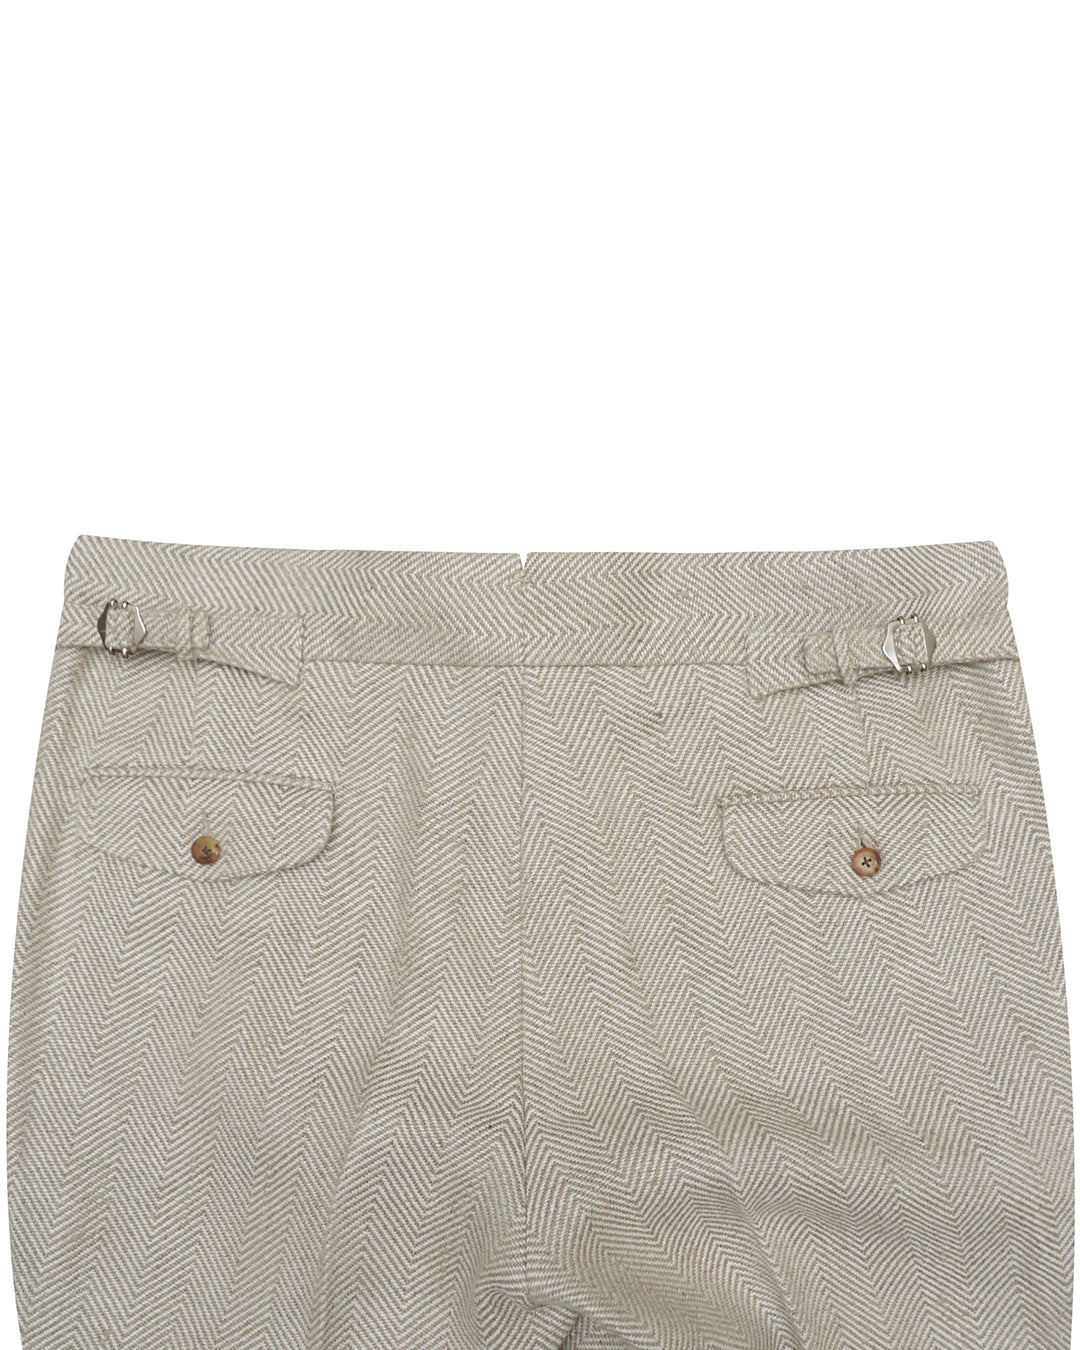 Back view of custom linen canvas pants for men by Luxire in golden tan